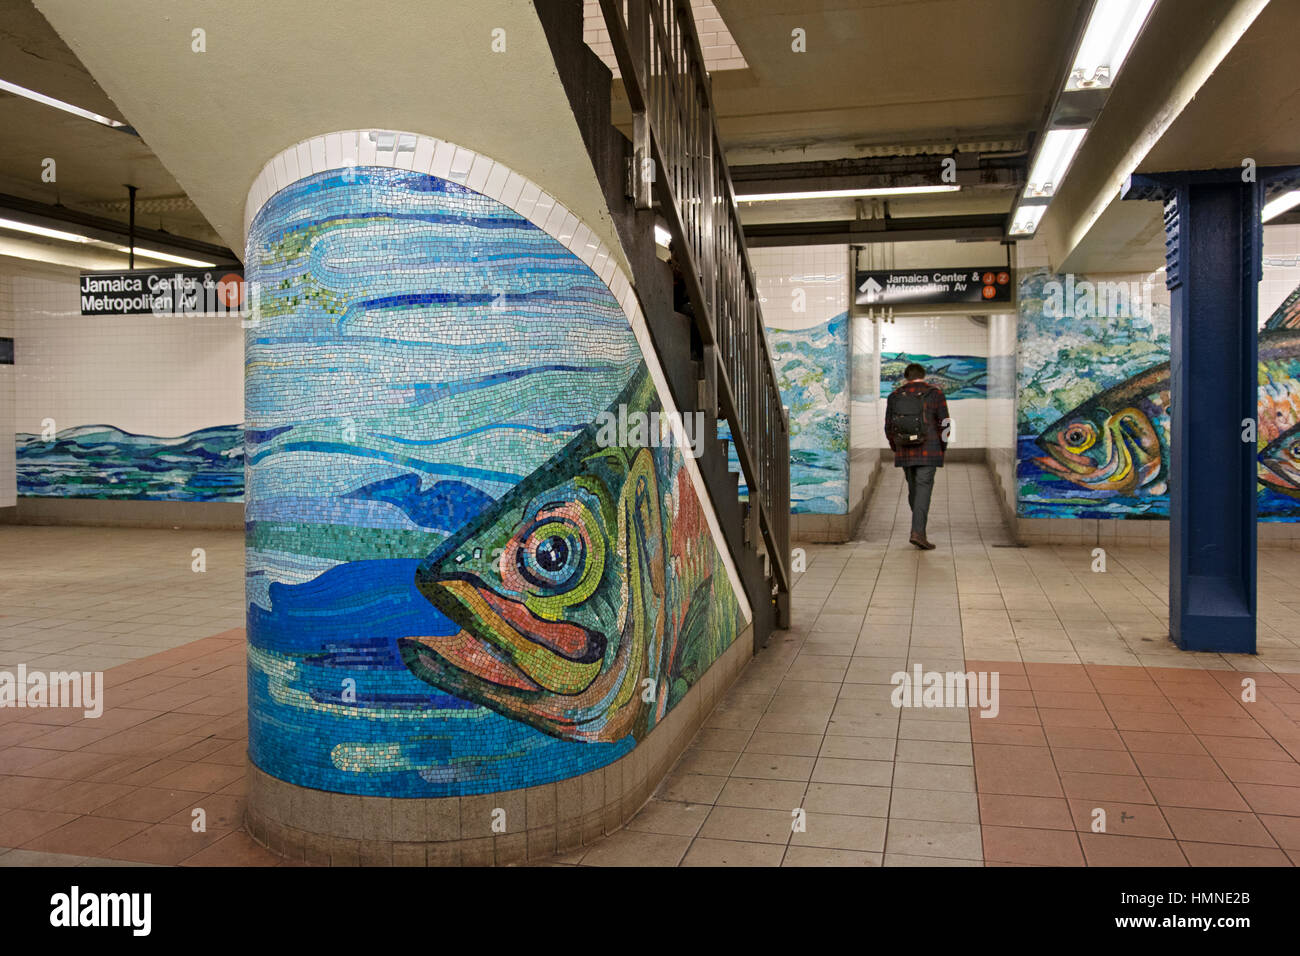 Subway art at the Essex Street Delancey Street Station on the F, J, M & Z lines in Manhattan, New York City. Stock Photo